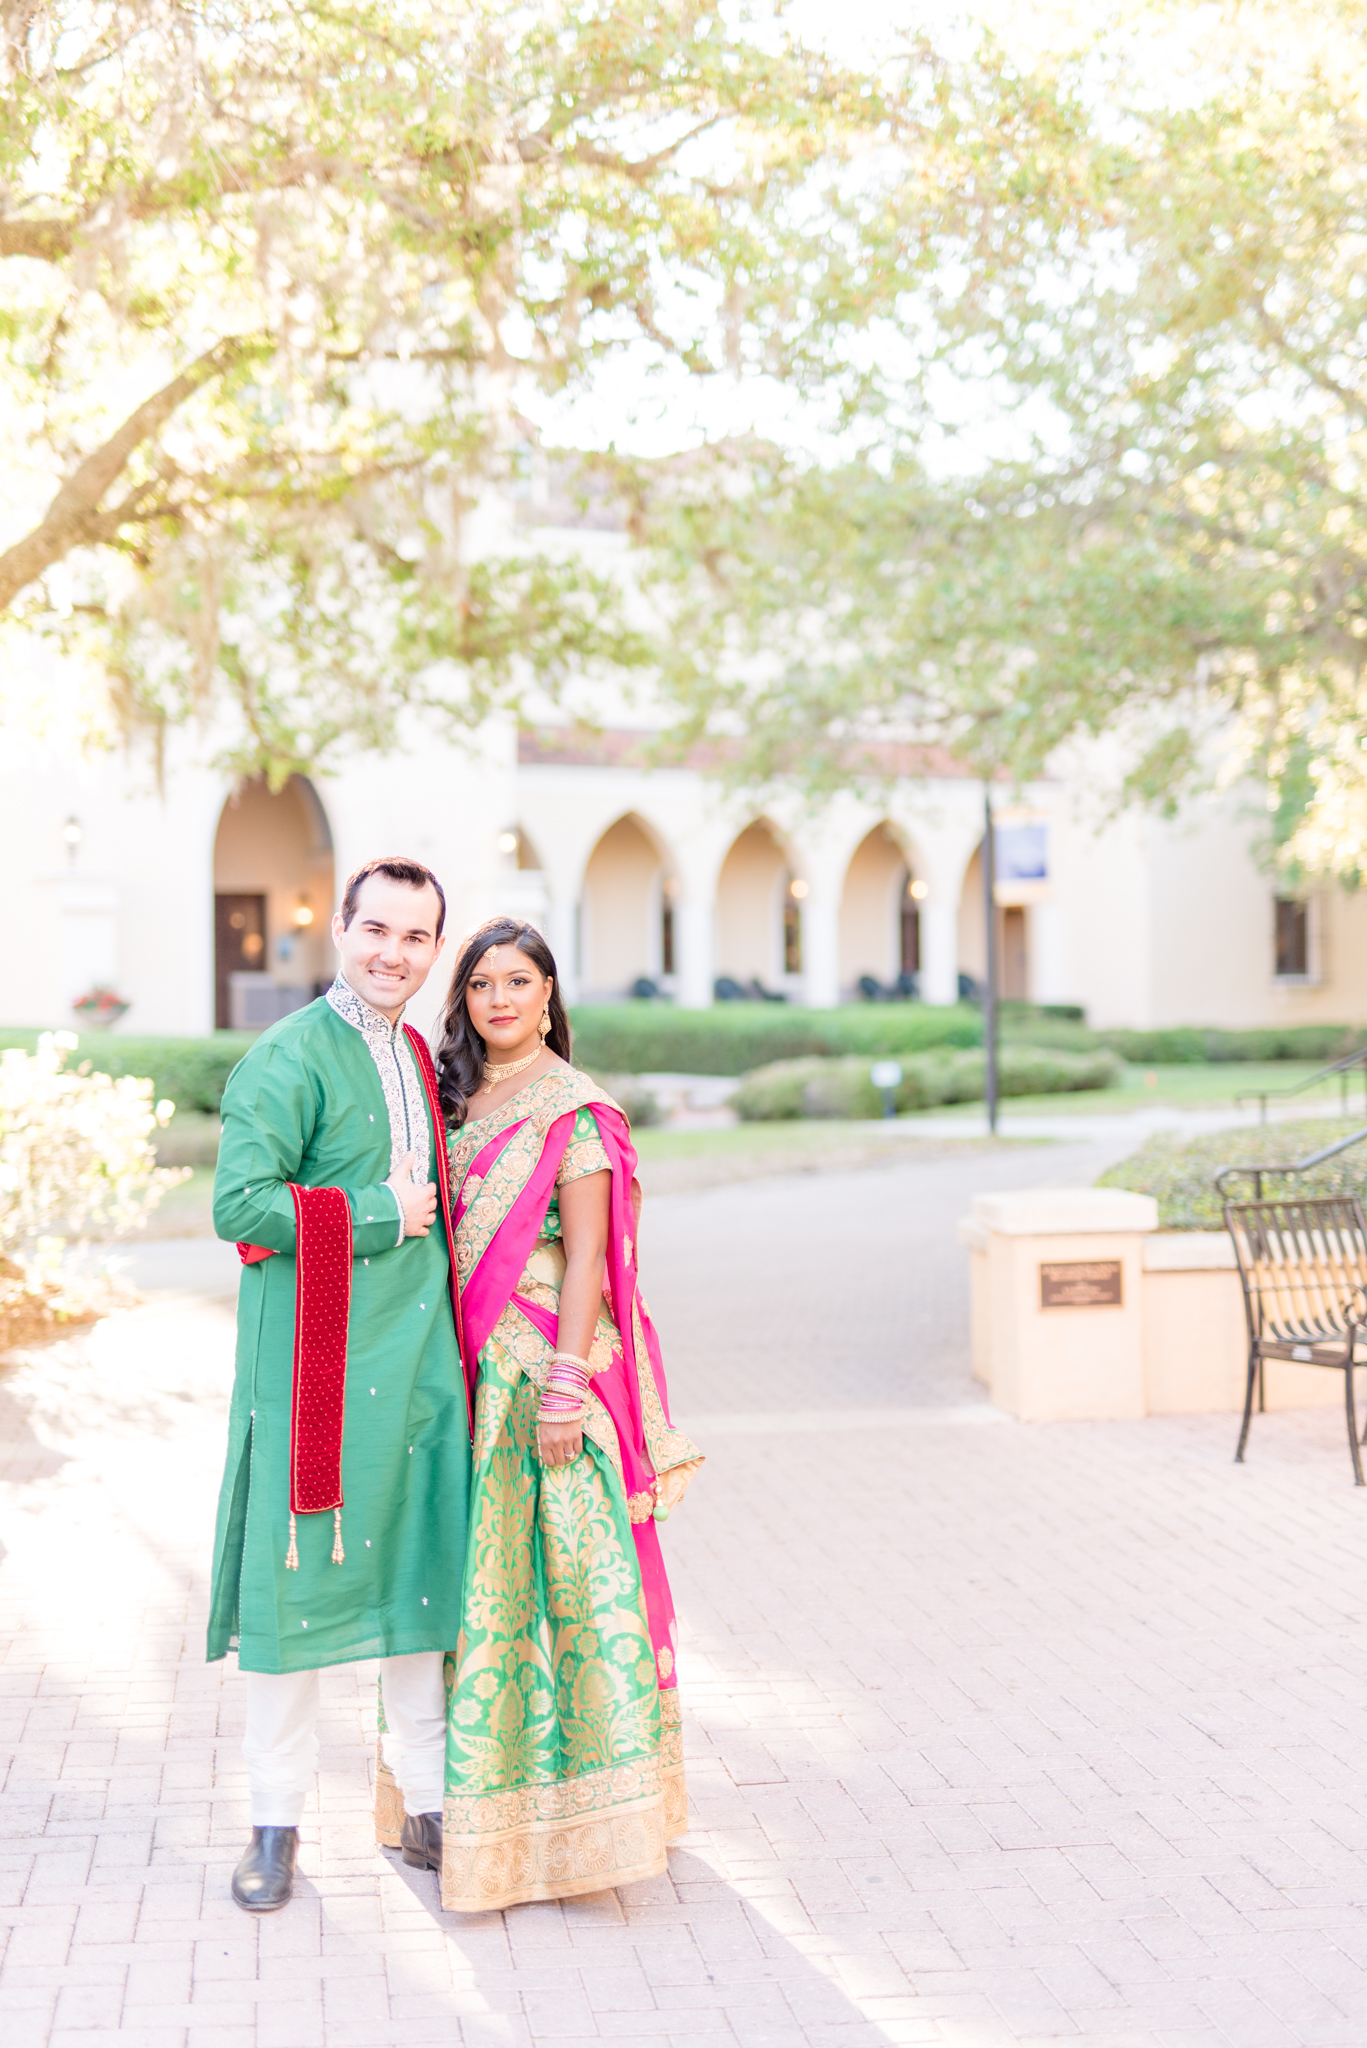 Man and woman smile at camera in Indian outfits.